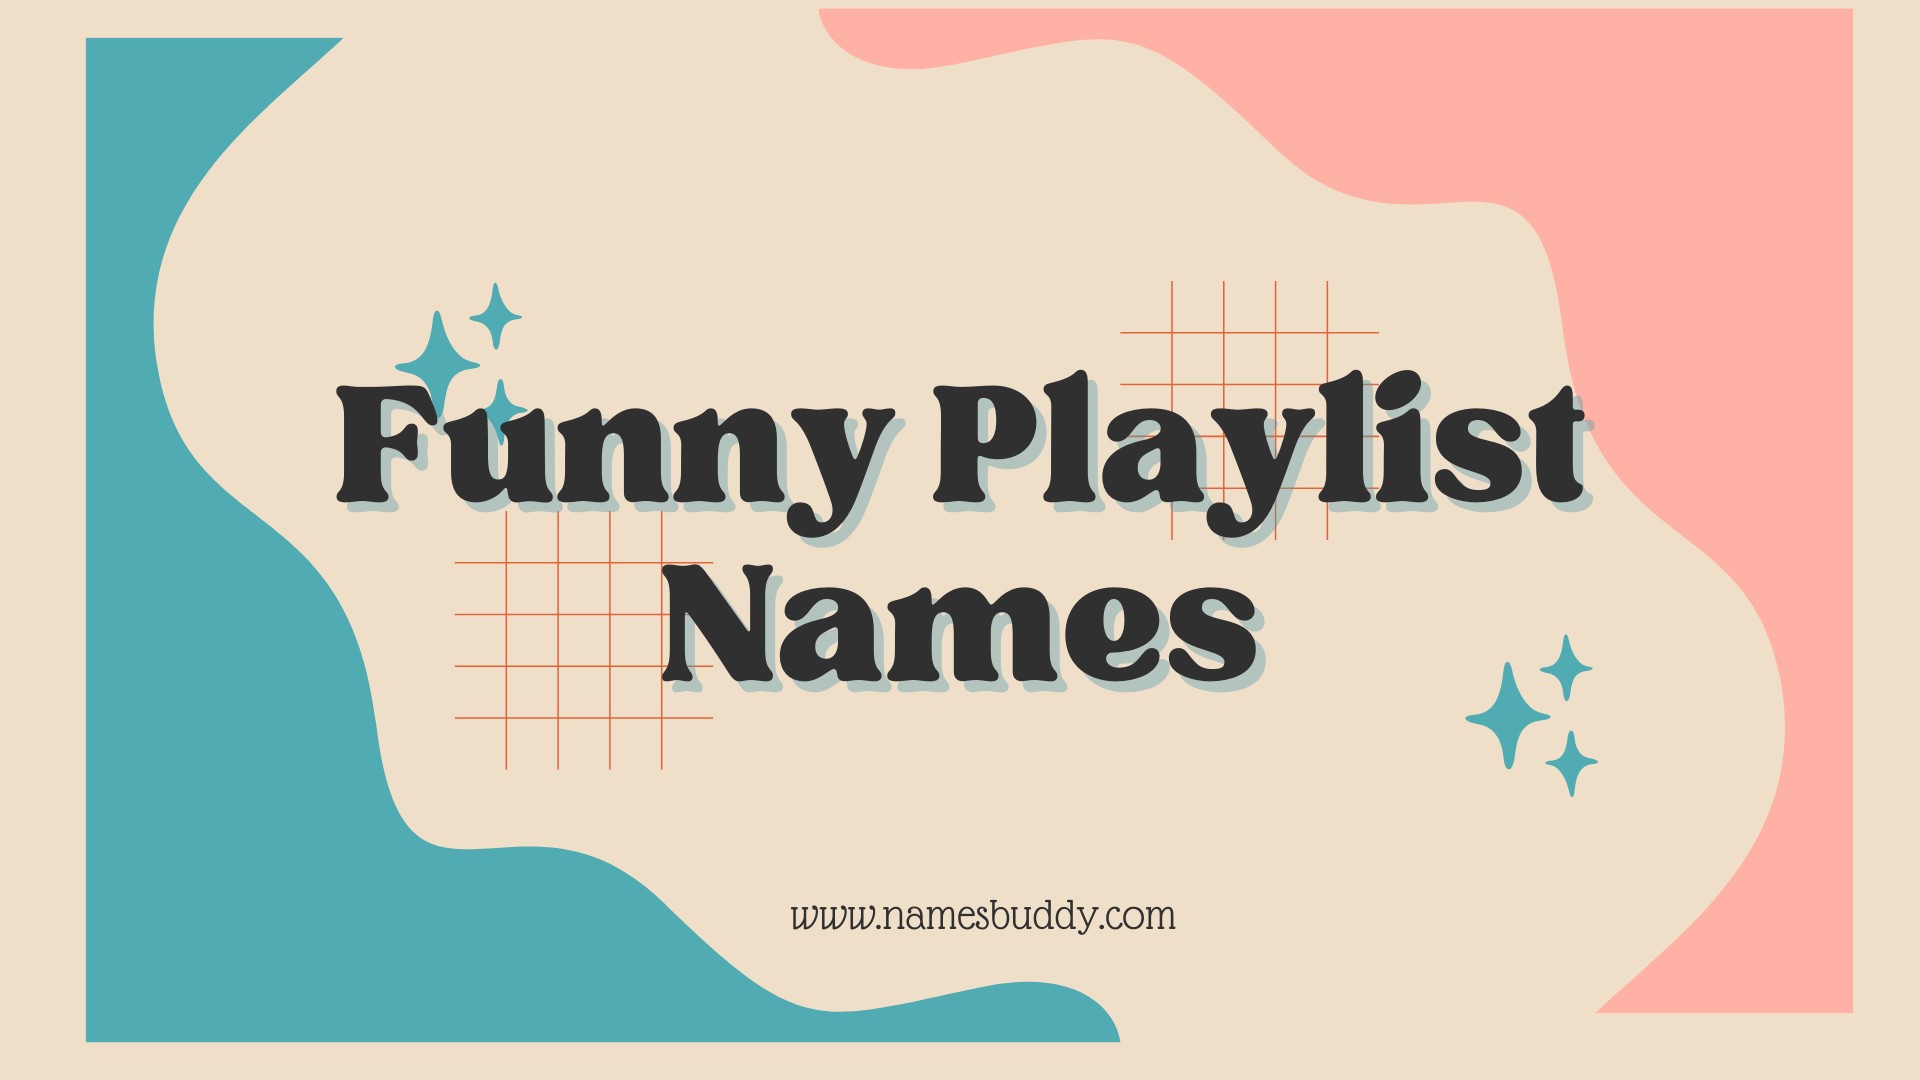 200+ Funny Playlist Names for Your Next Playlist